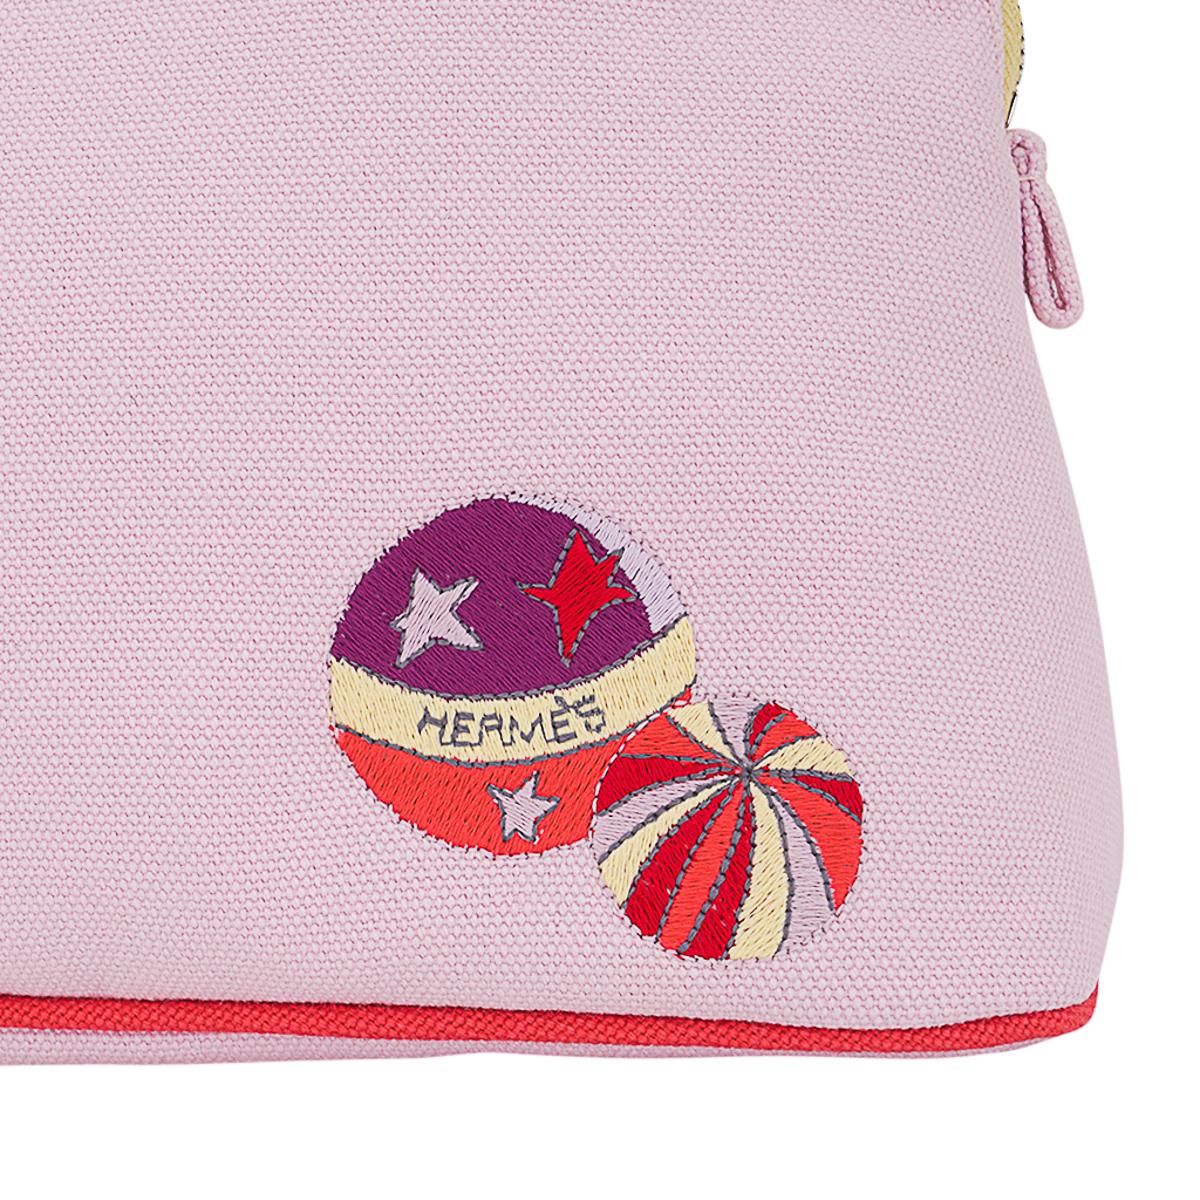 Hermes Circus Bolide Travel Case Pale Pink Embroidered In New Condition For Sale In Miami, FL